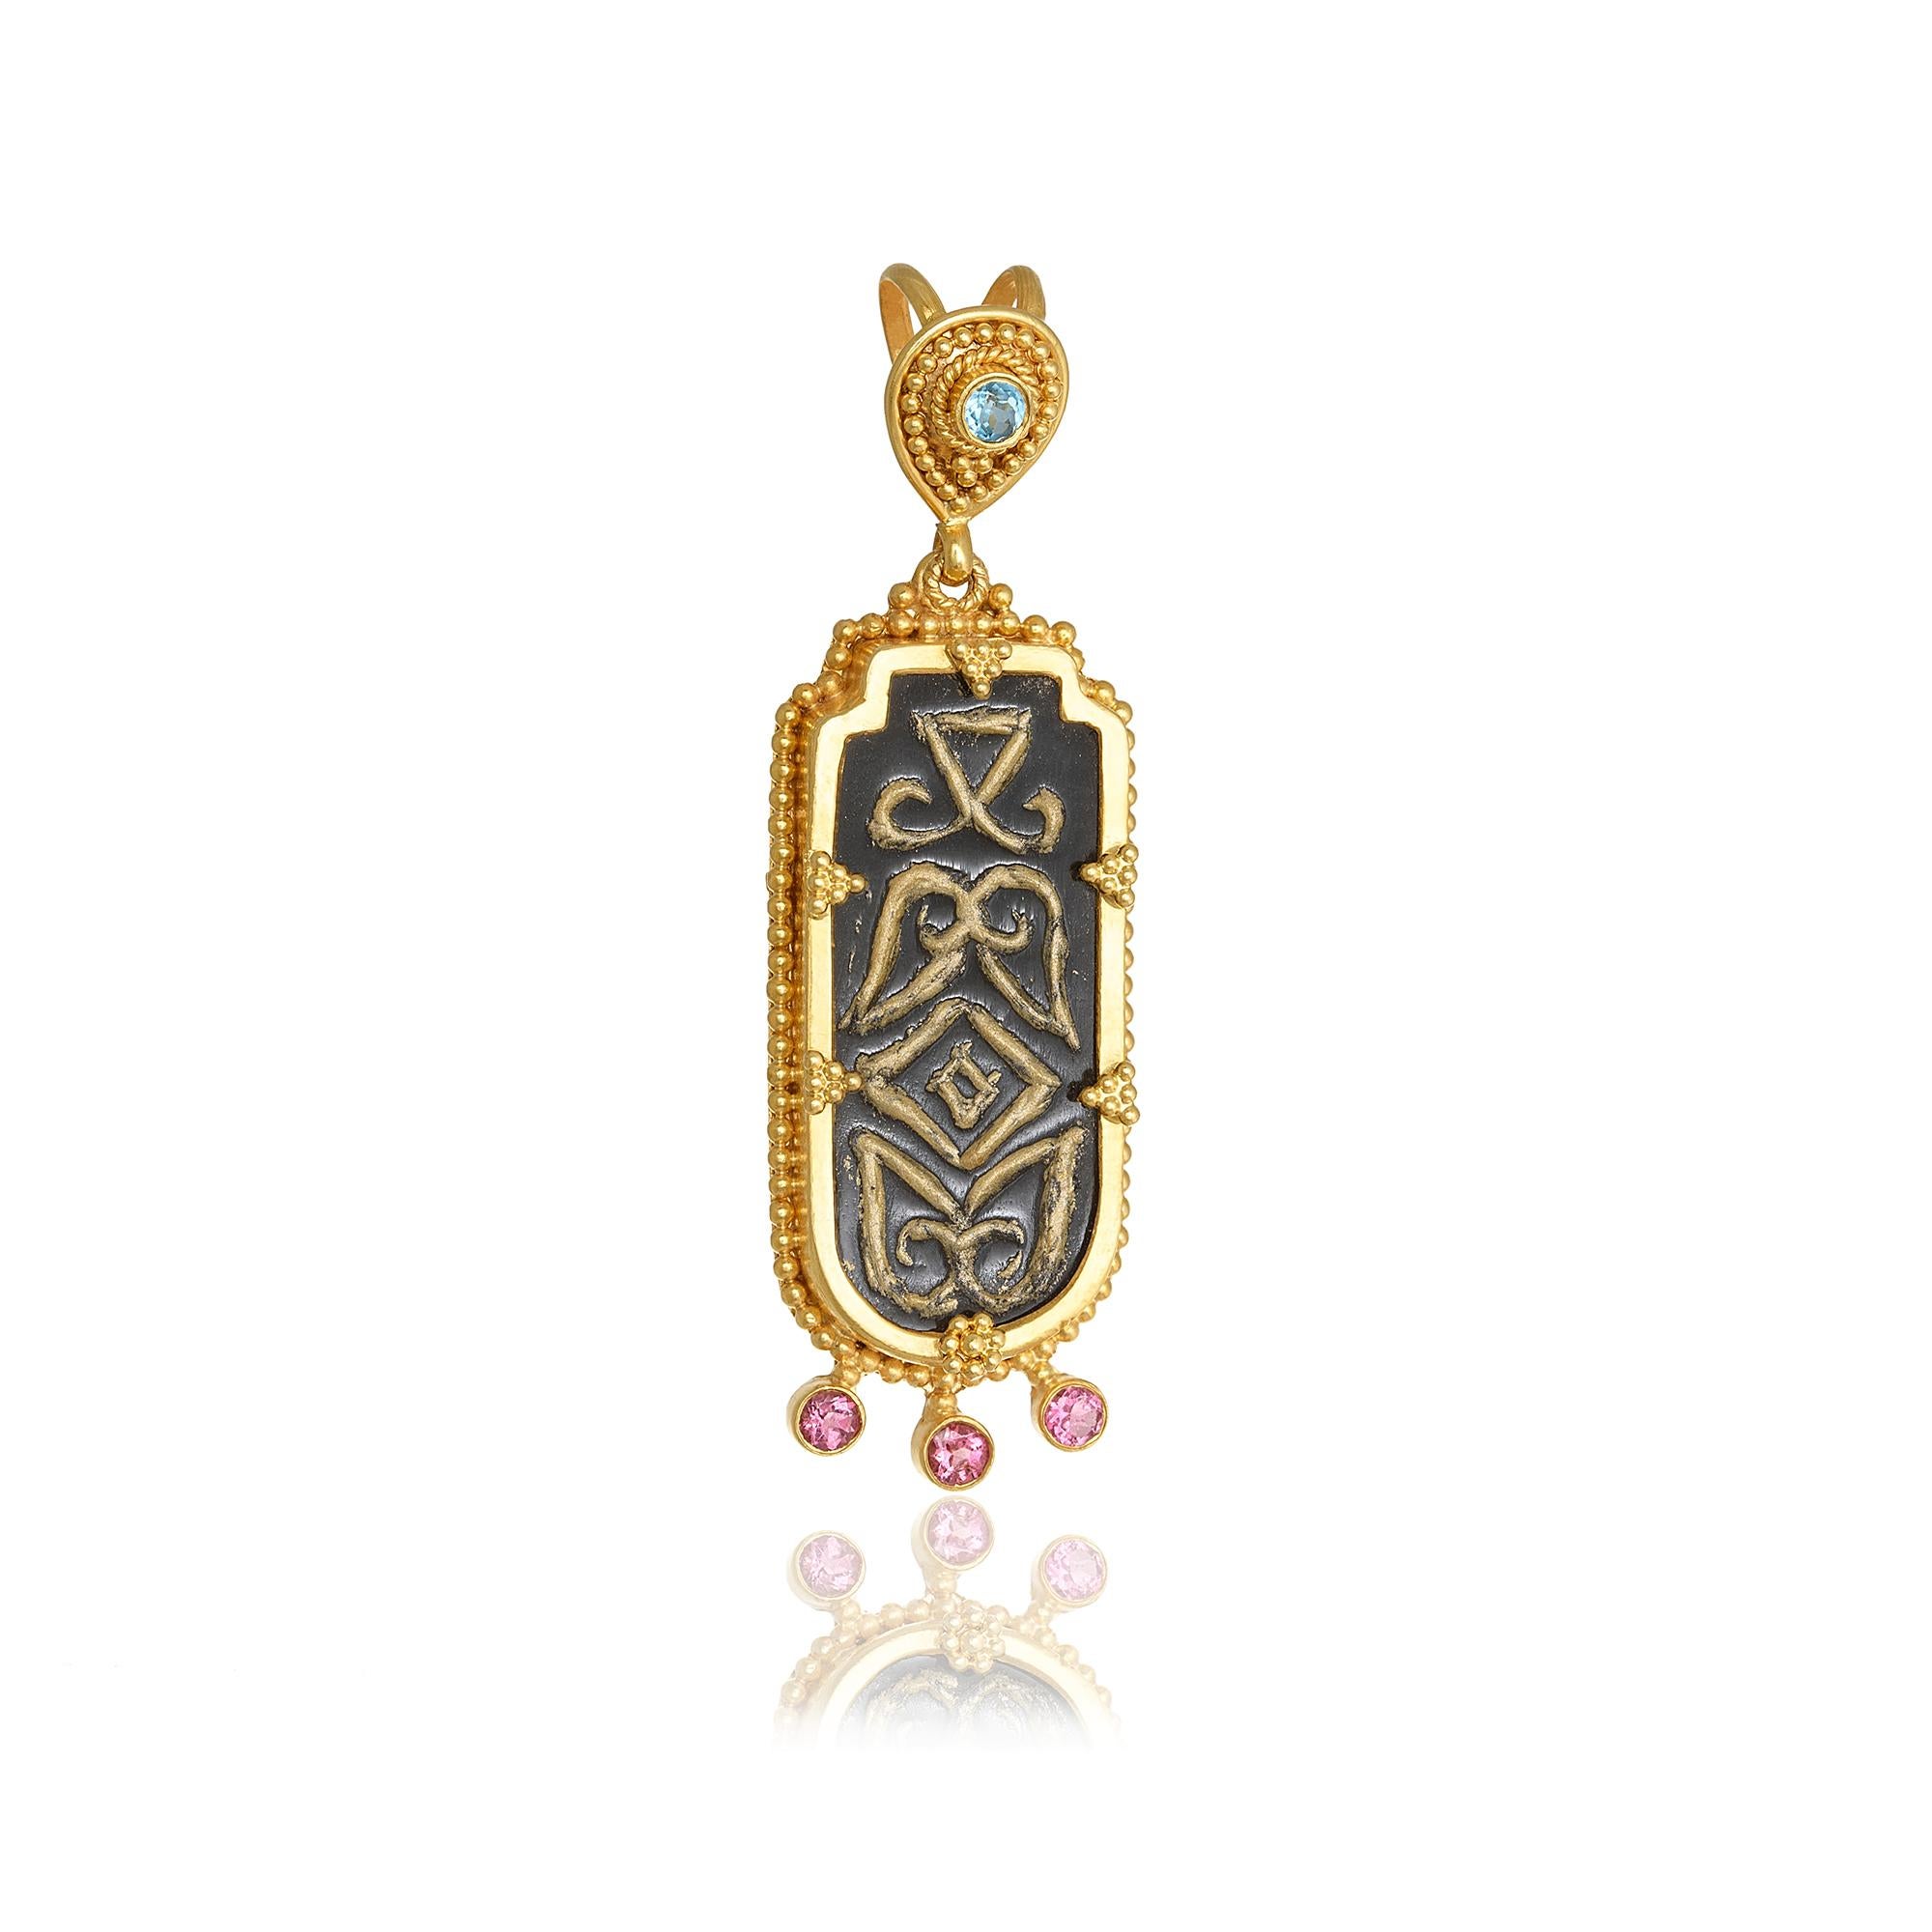 Oblong shape obsidian pendant necklace handcrafted in 22Kt yellow gold, featuring round Tourmalines and Blue Topazes. This elegant pendant necklace is braided using the traditional techniques of granulation and fligree. The minute gold beads around